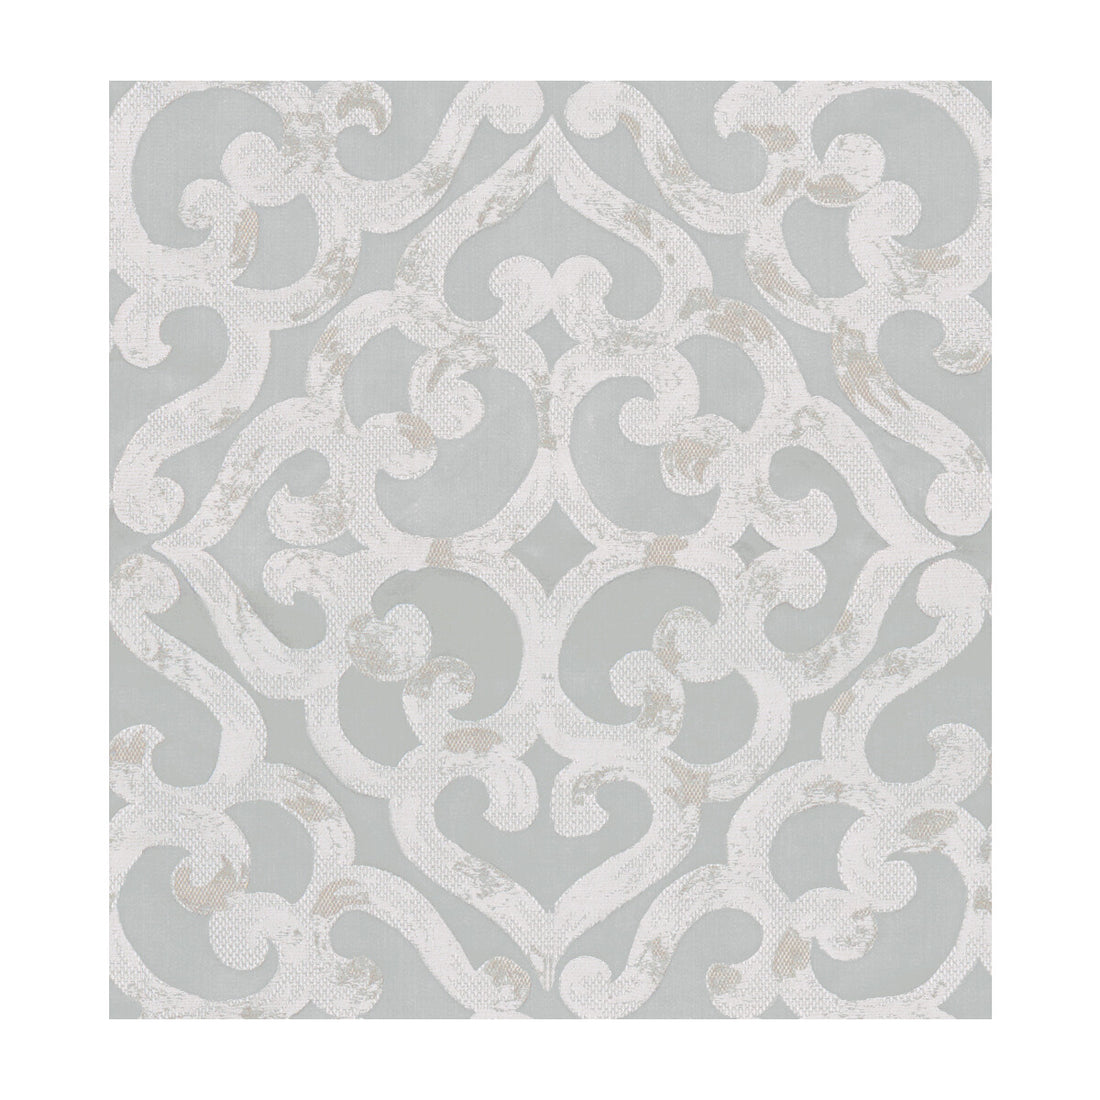 Kurrajong fabric in seaglass color - pattern 33799.16.0 - by Kravet Design in the Candice Olson collection